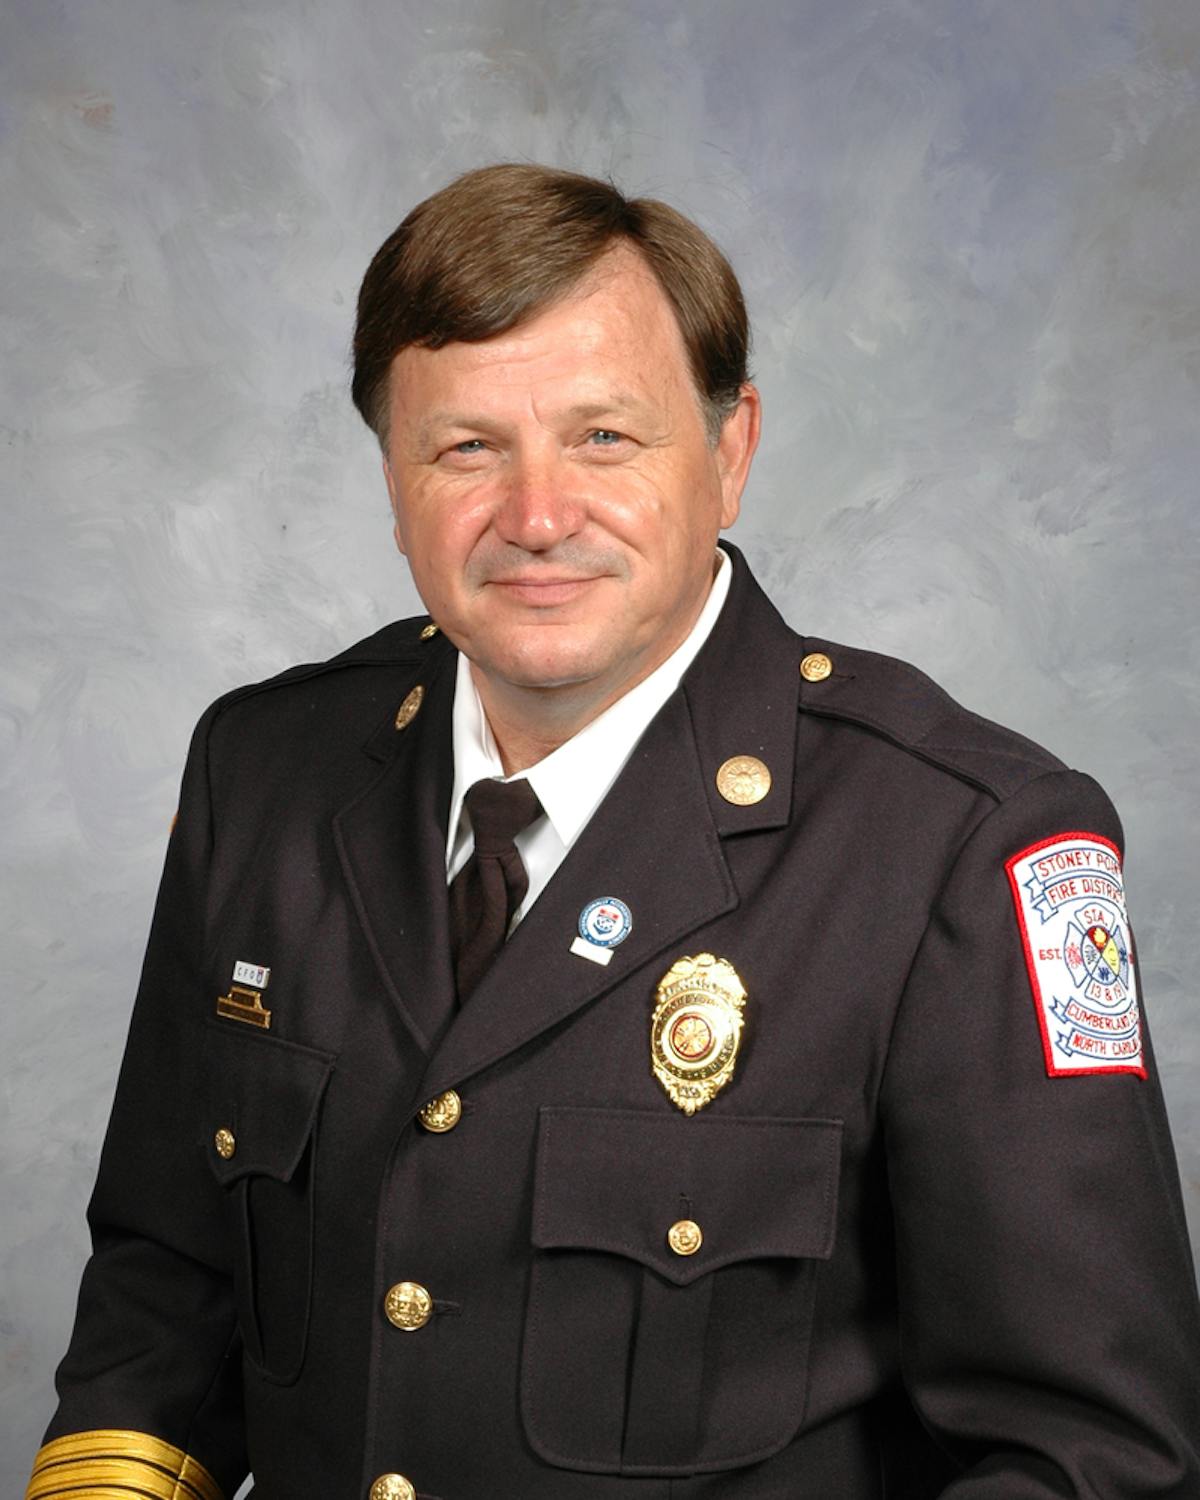 2013 Volunteer Fire Chief of the Year recipient Freddy L. Johnson, Sr. of the Stoney Point Volunteer Fire Dept. in Fayetteville, N.C.